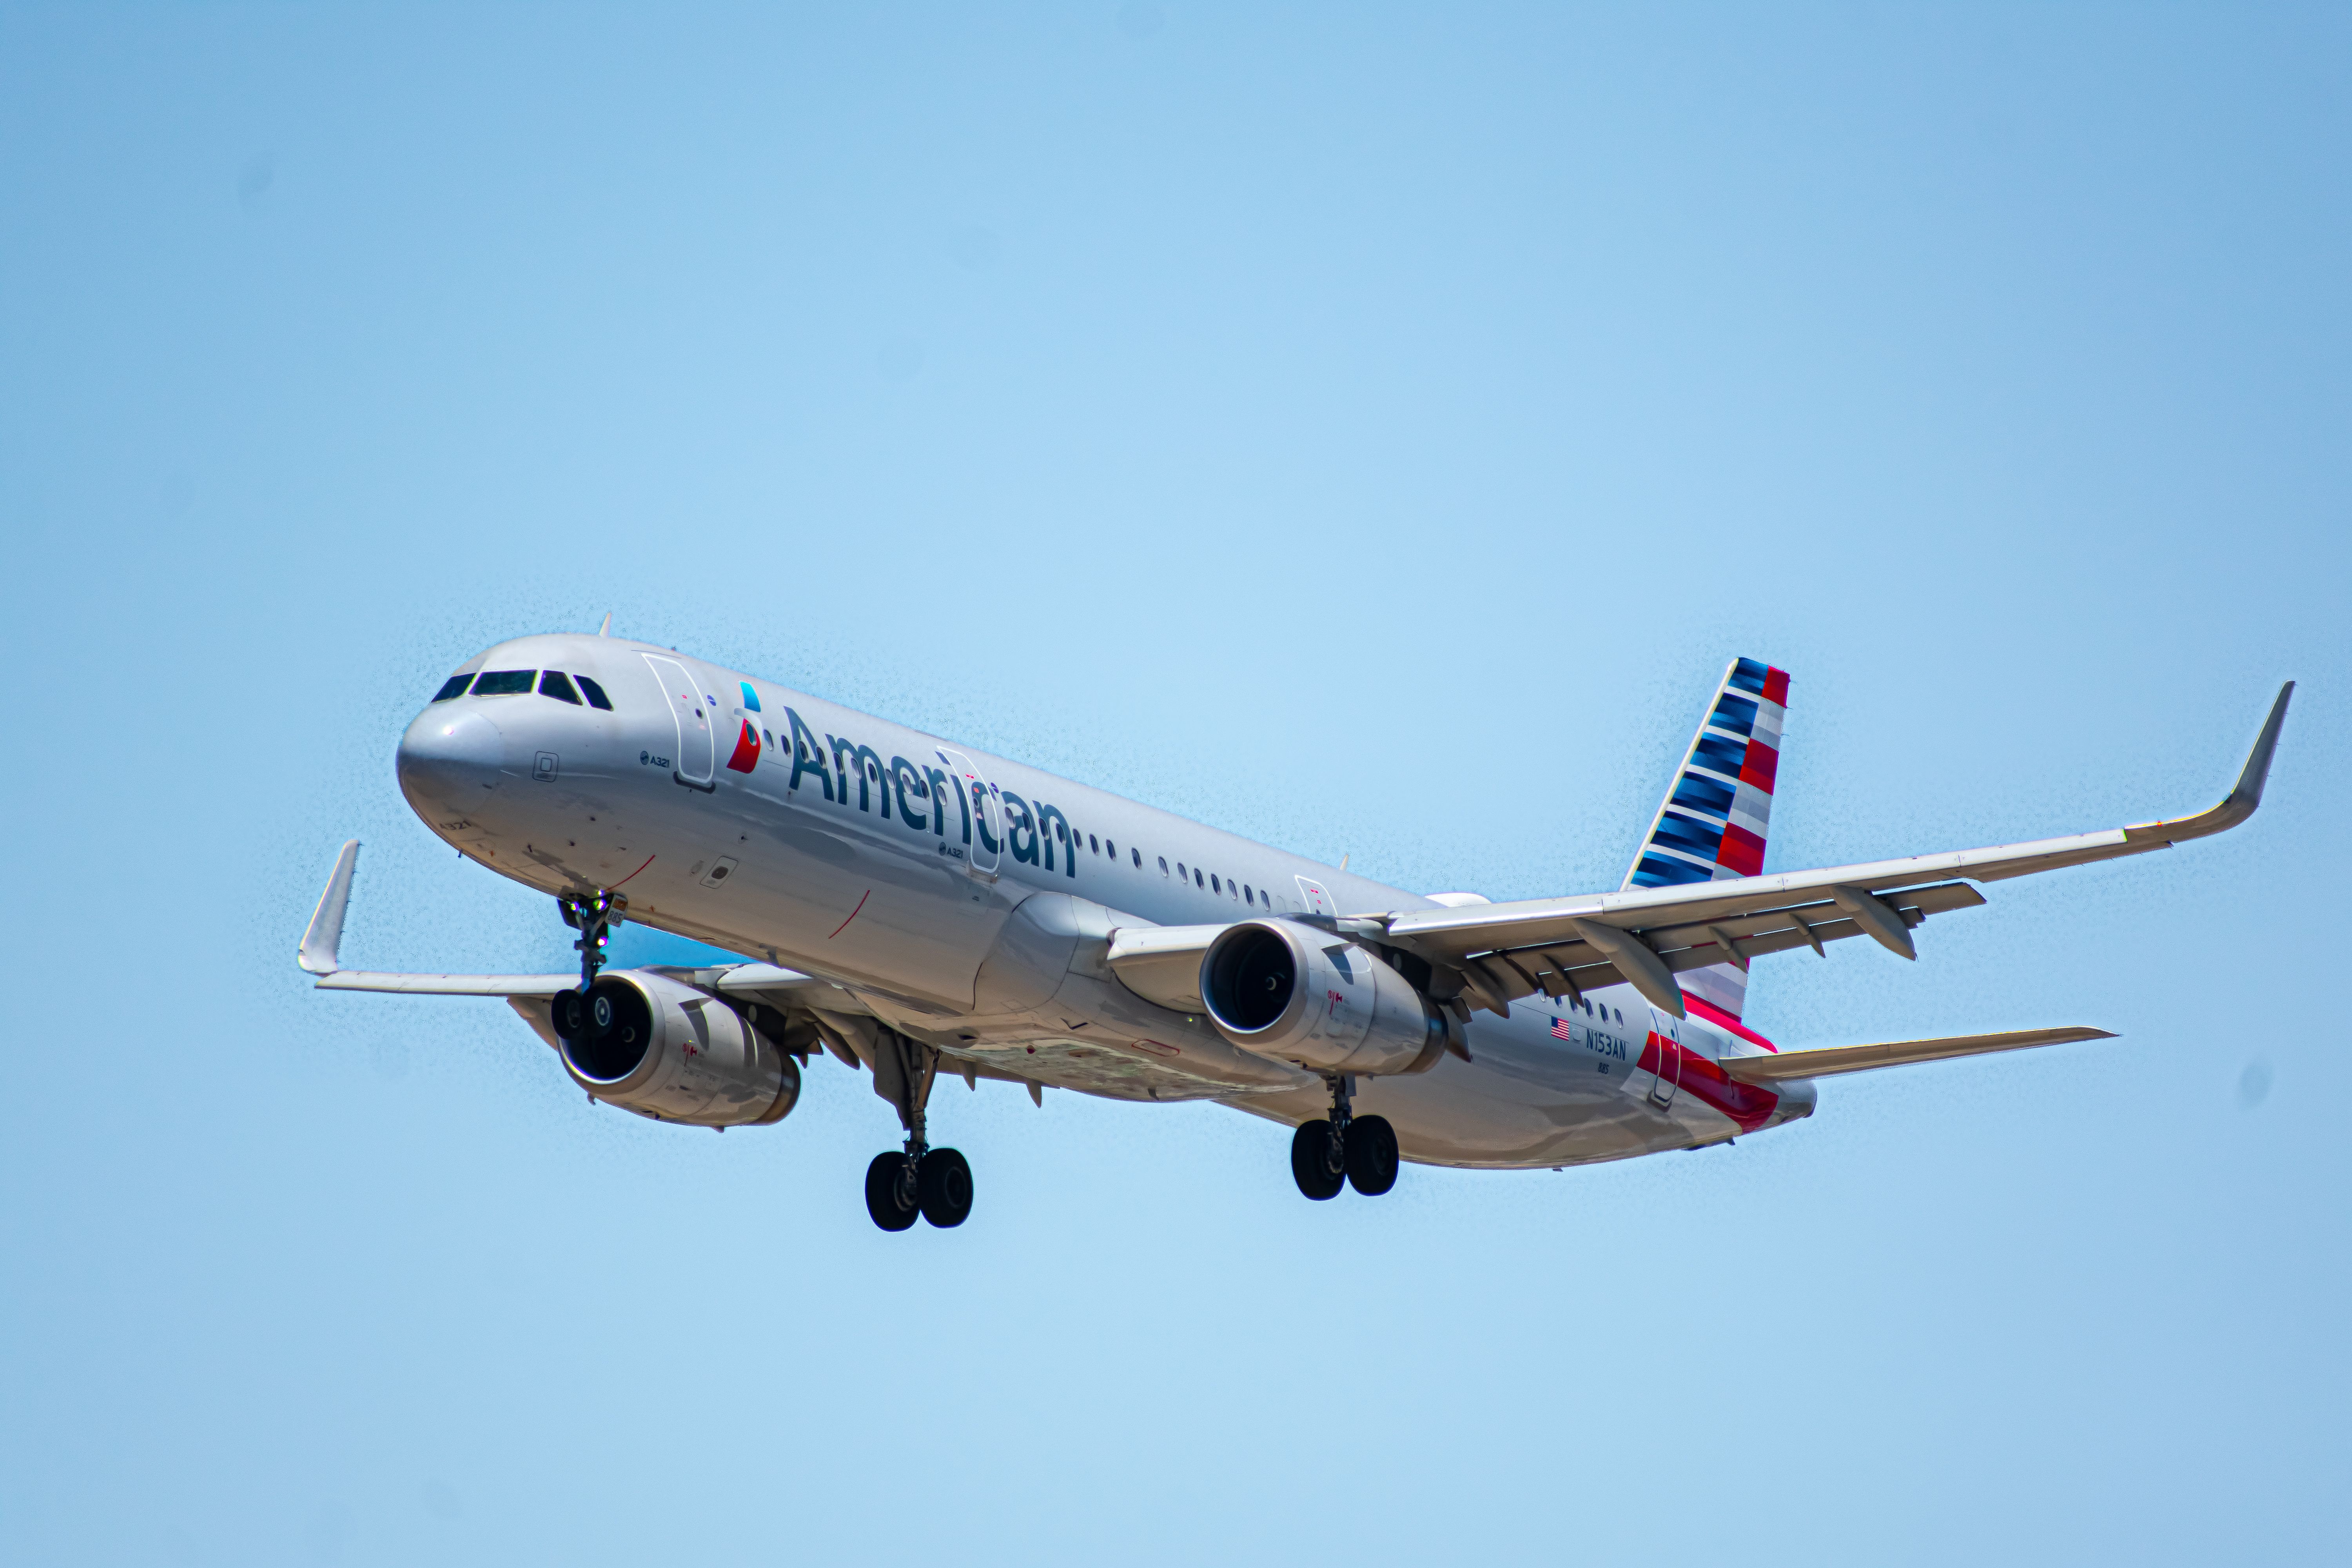 American Airlines Airbus A321 landing at LAX